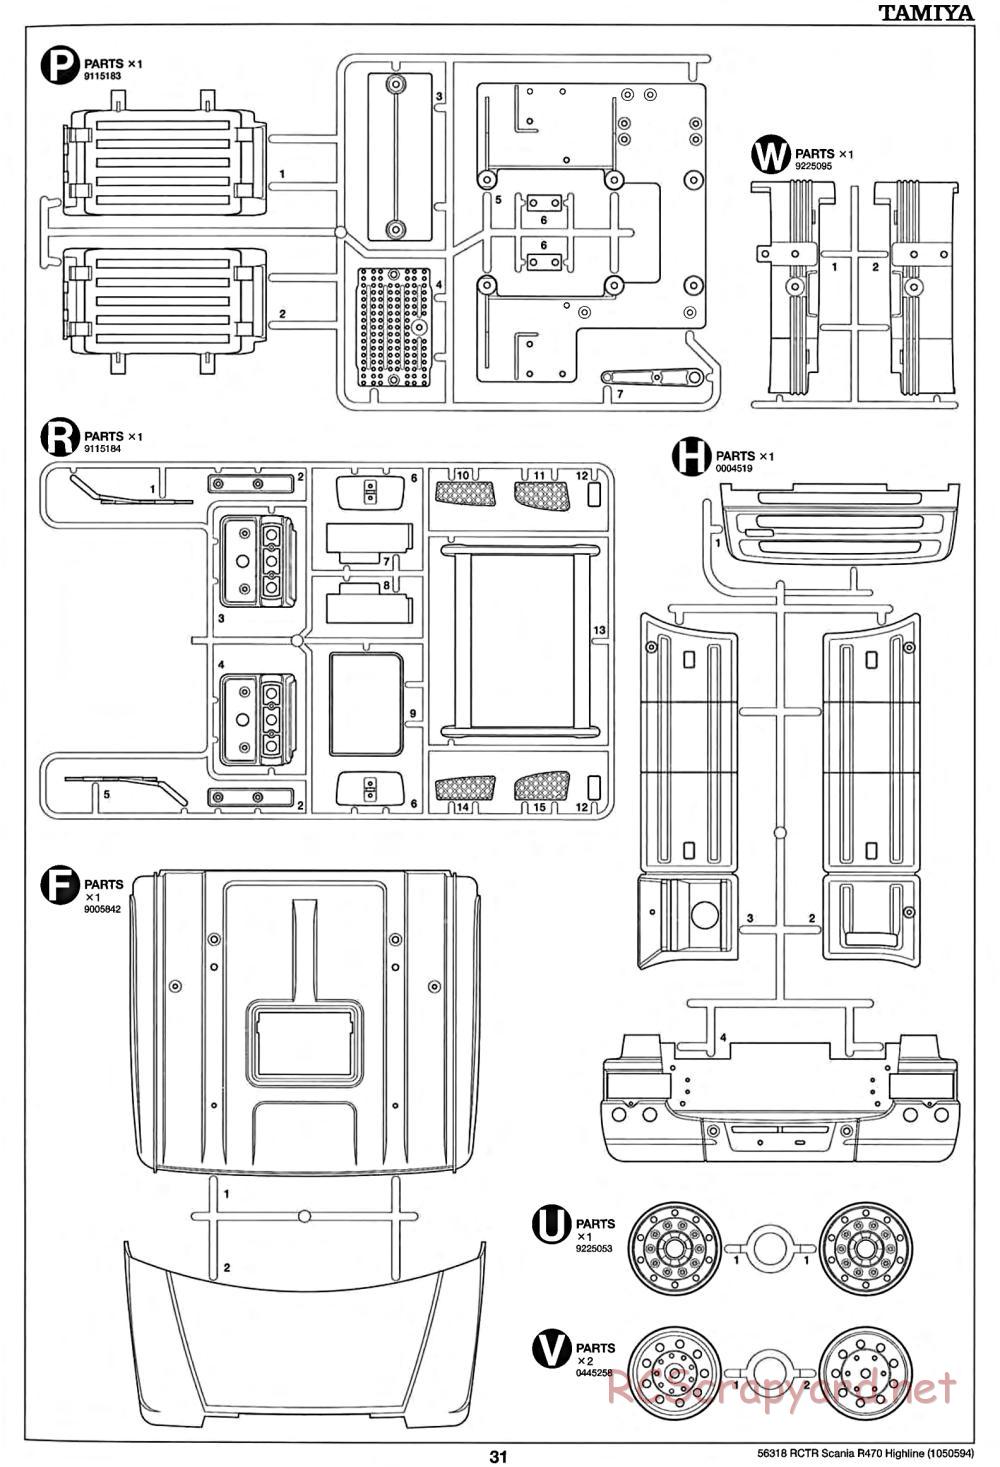 Tamiya - Scania R470 Highline Tractor Truck Chassis - Manual - Page 31